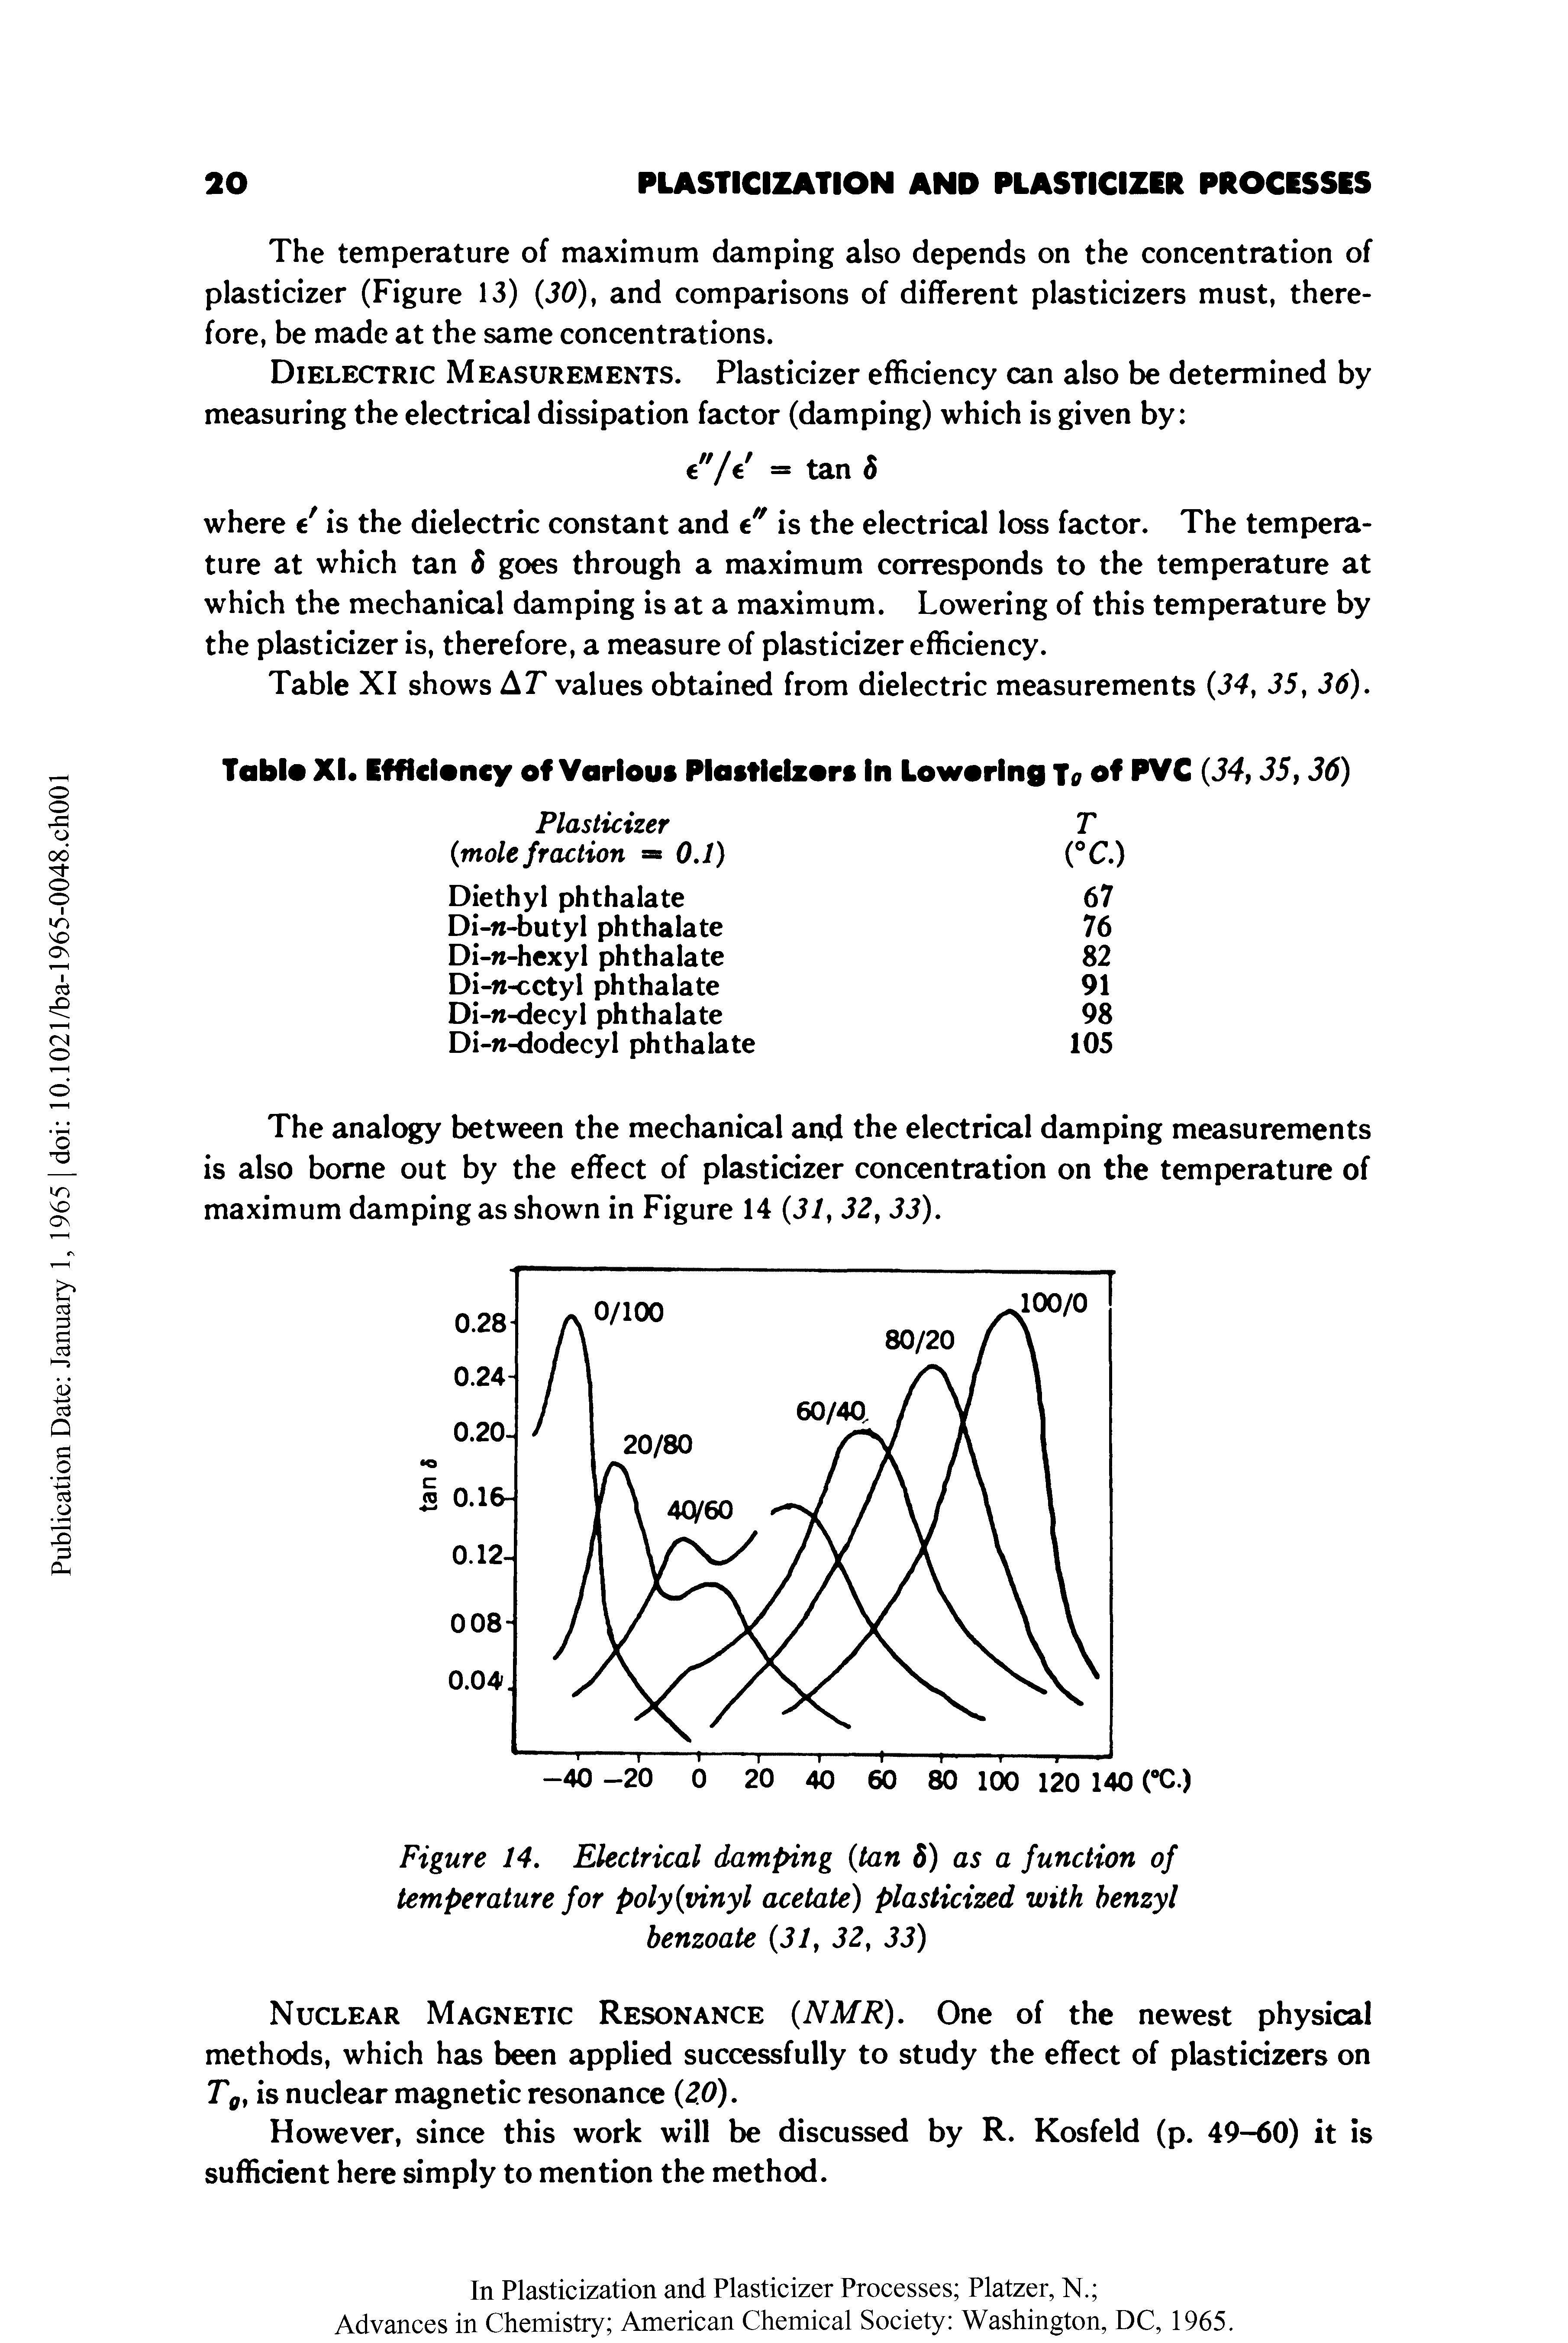 Figure 14. Electrical damping (tan 8) as a function of temperature for poly (vinyl acetate) plasticized with benzyl benzoate (31, 32, 33)...